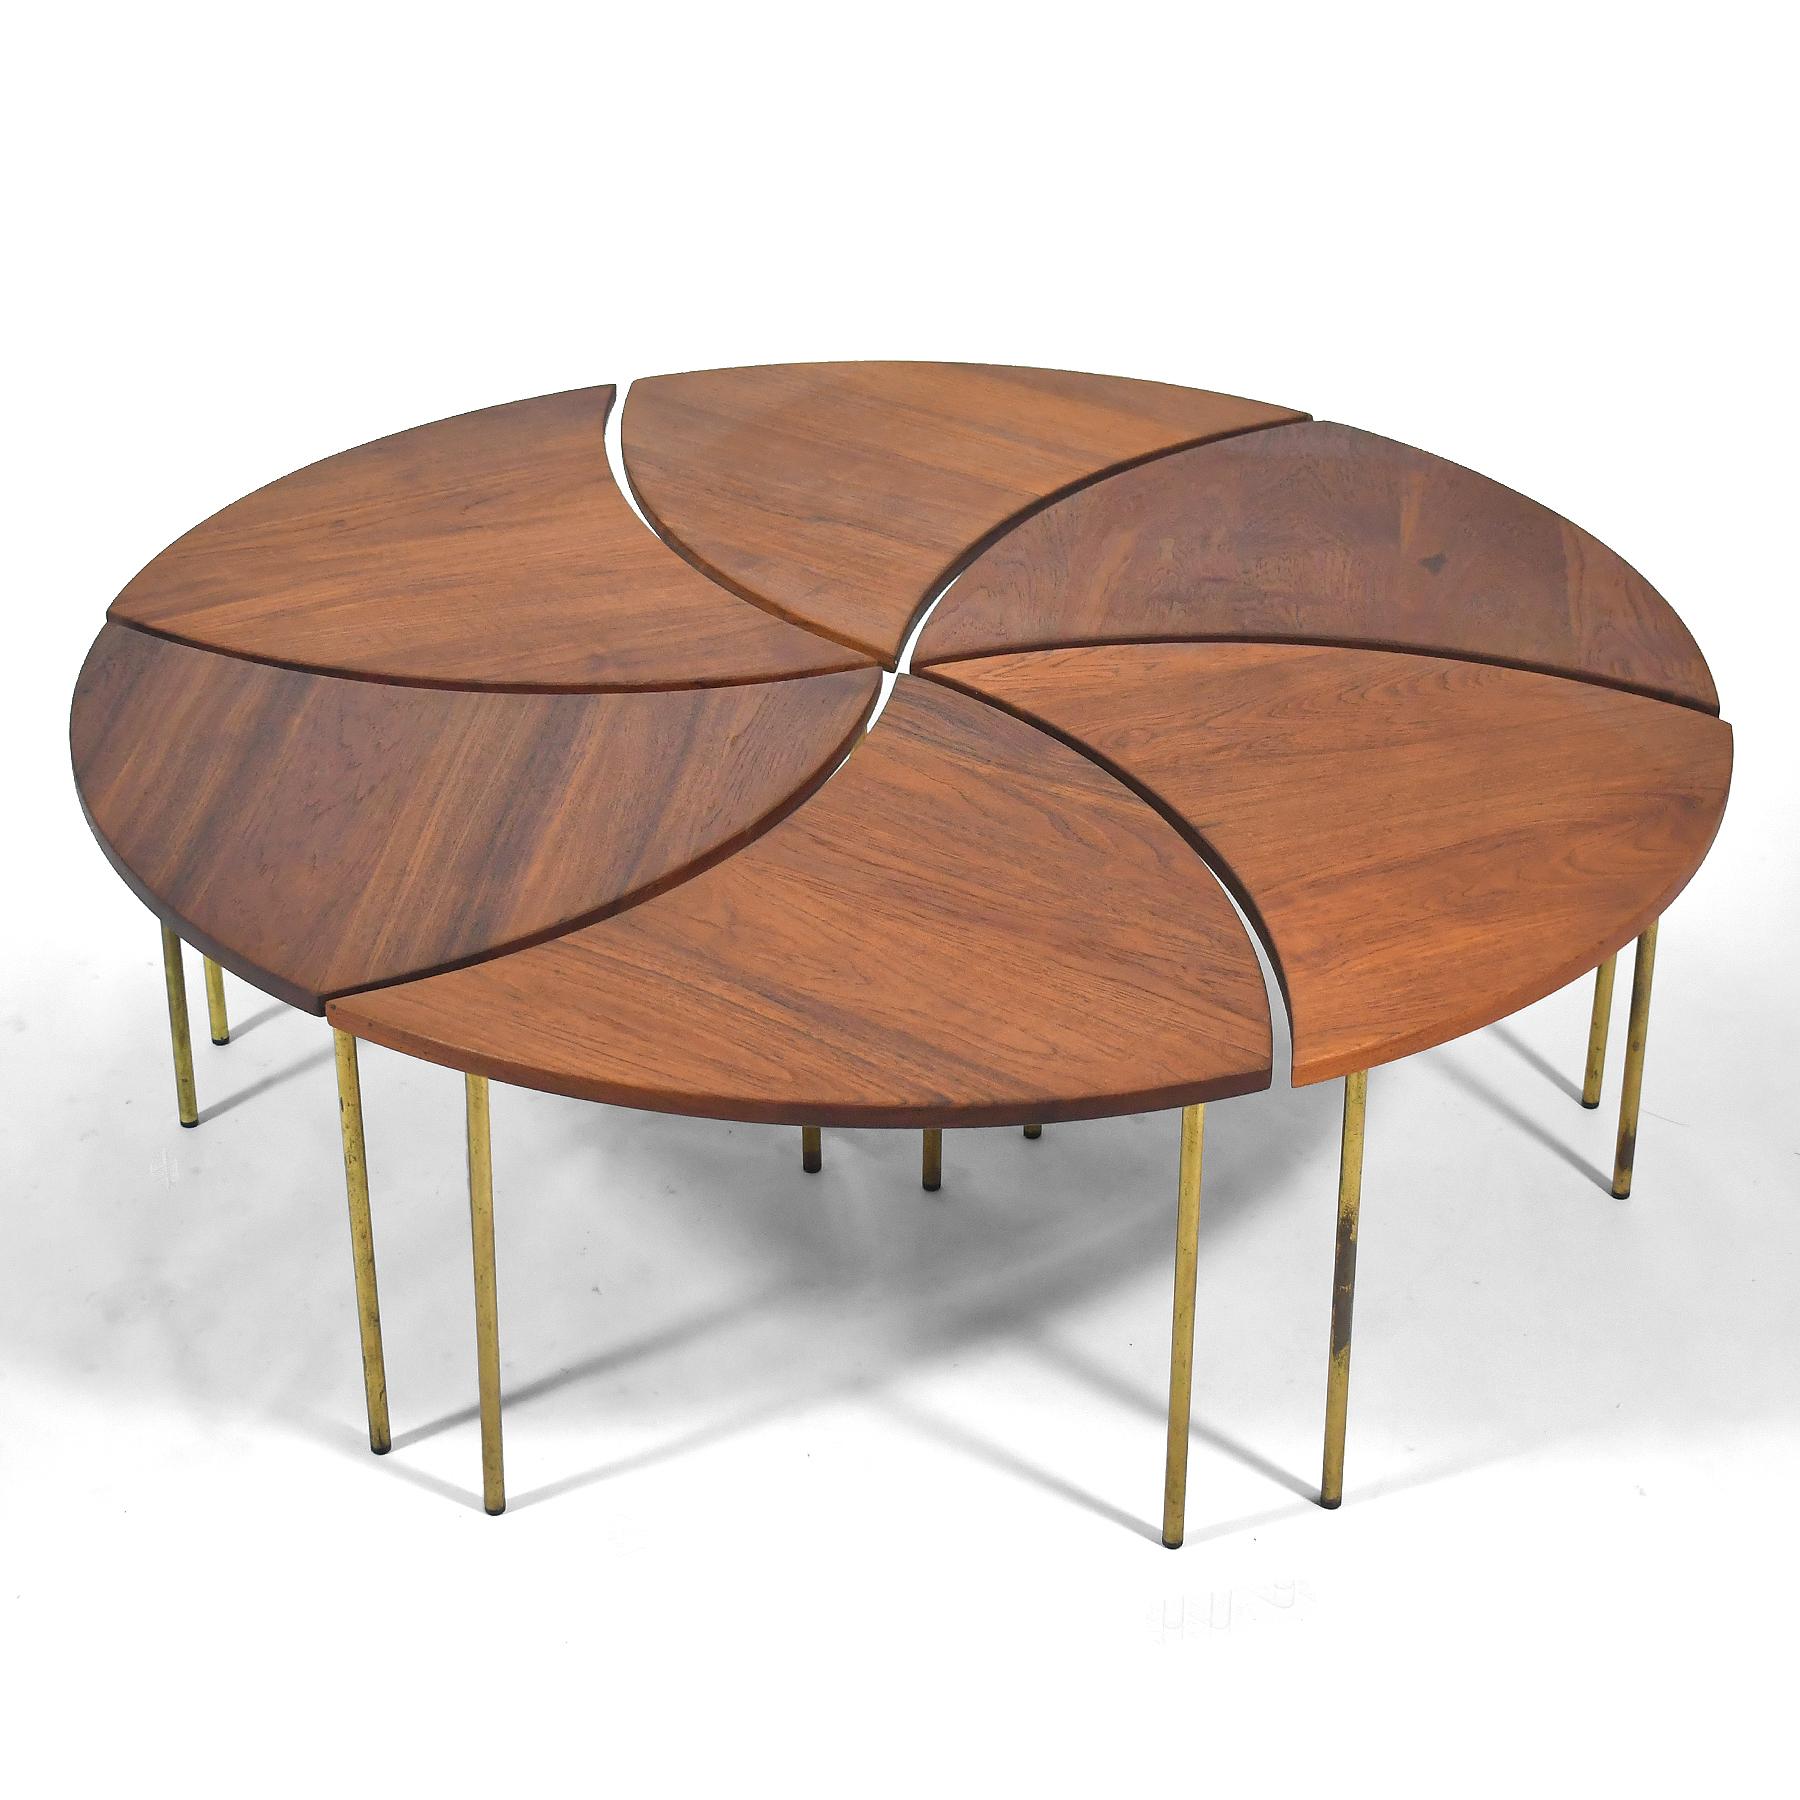 A brilliantly inventive design by Peter Hvidt the model #523 coffee table by France & Son is comprised of 6 individual tables made of solid teak with brass legs.  When arranged as shown they make a 51